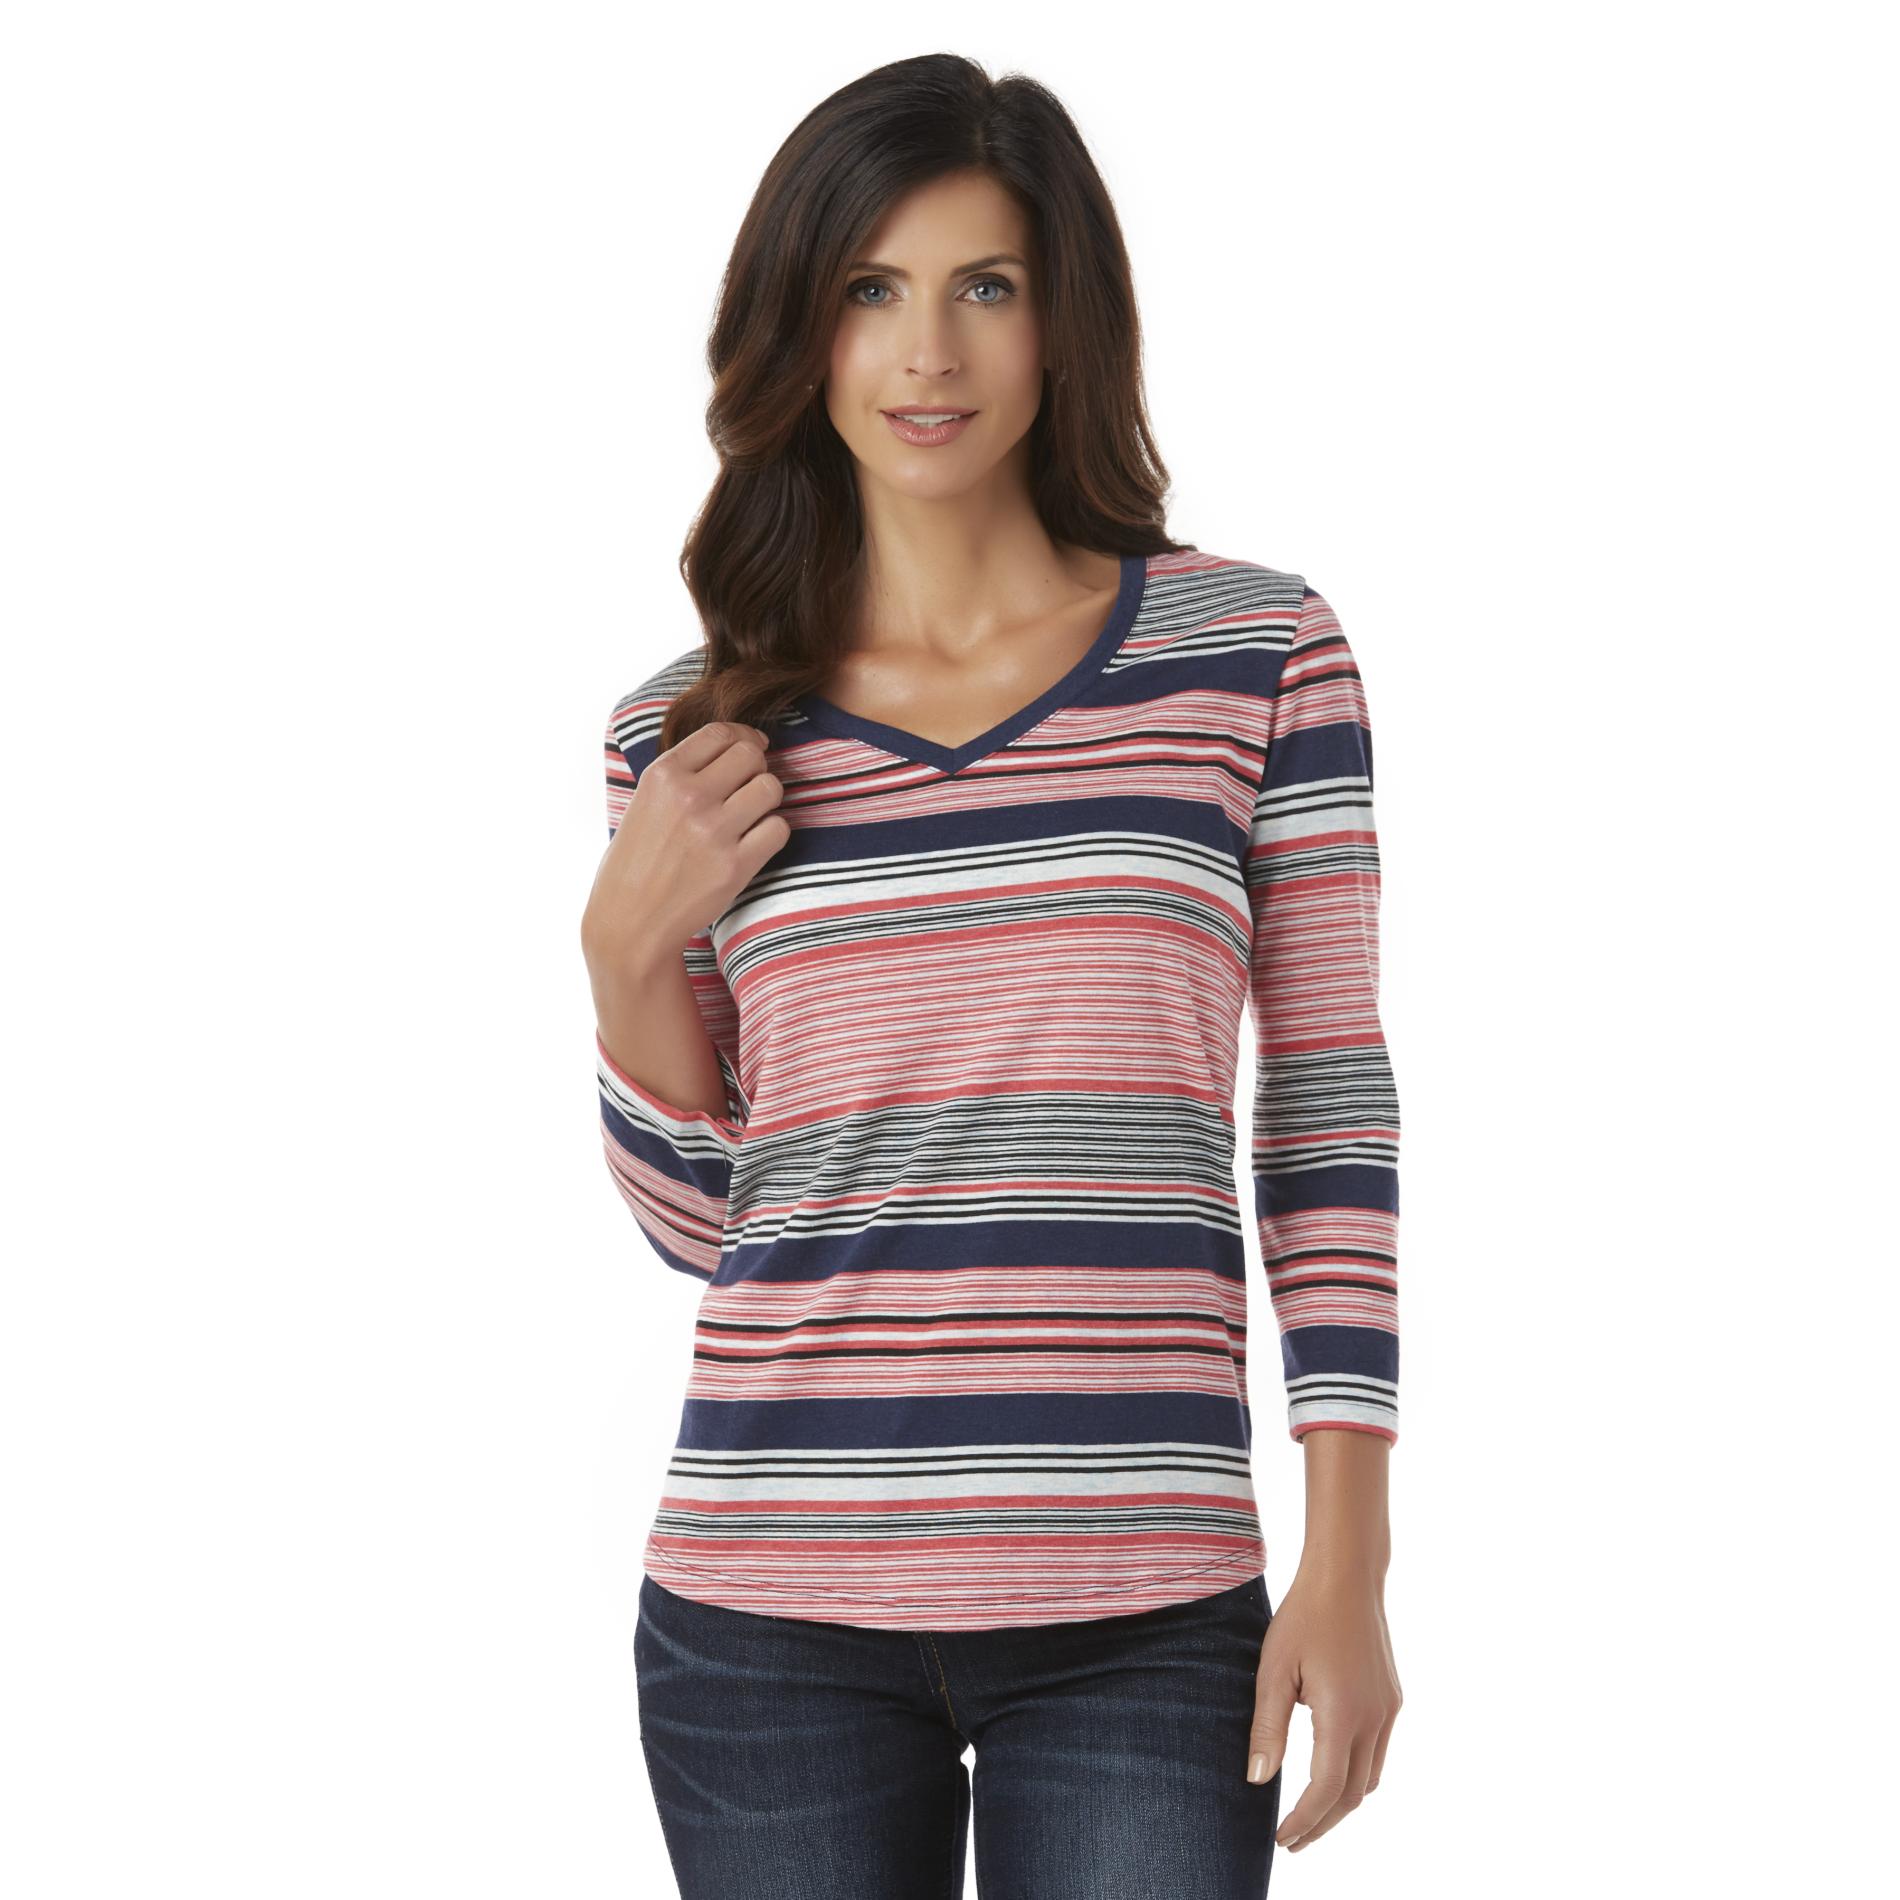 Basic Editions Women's V-Neck Top - Striped